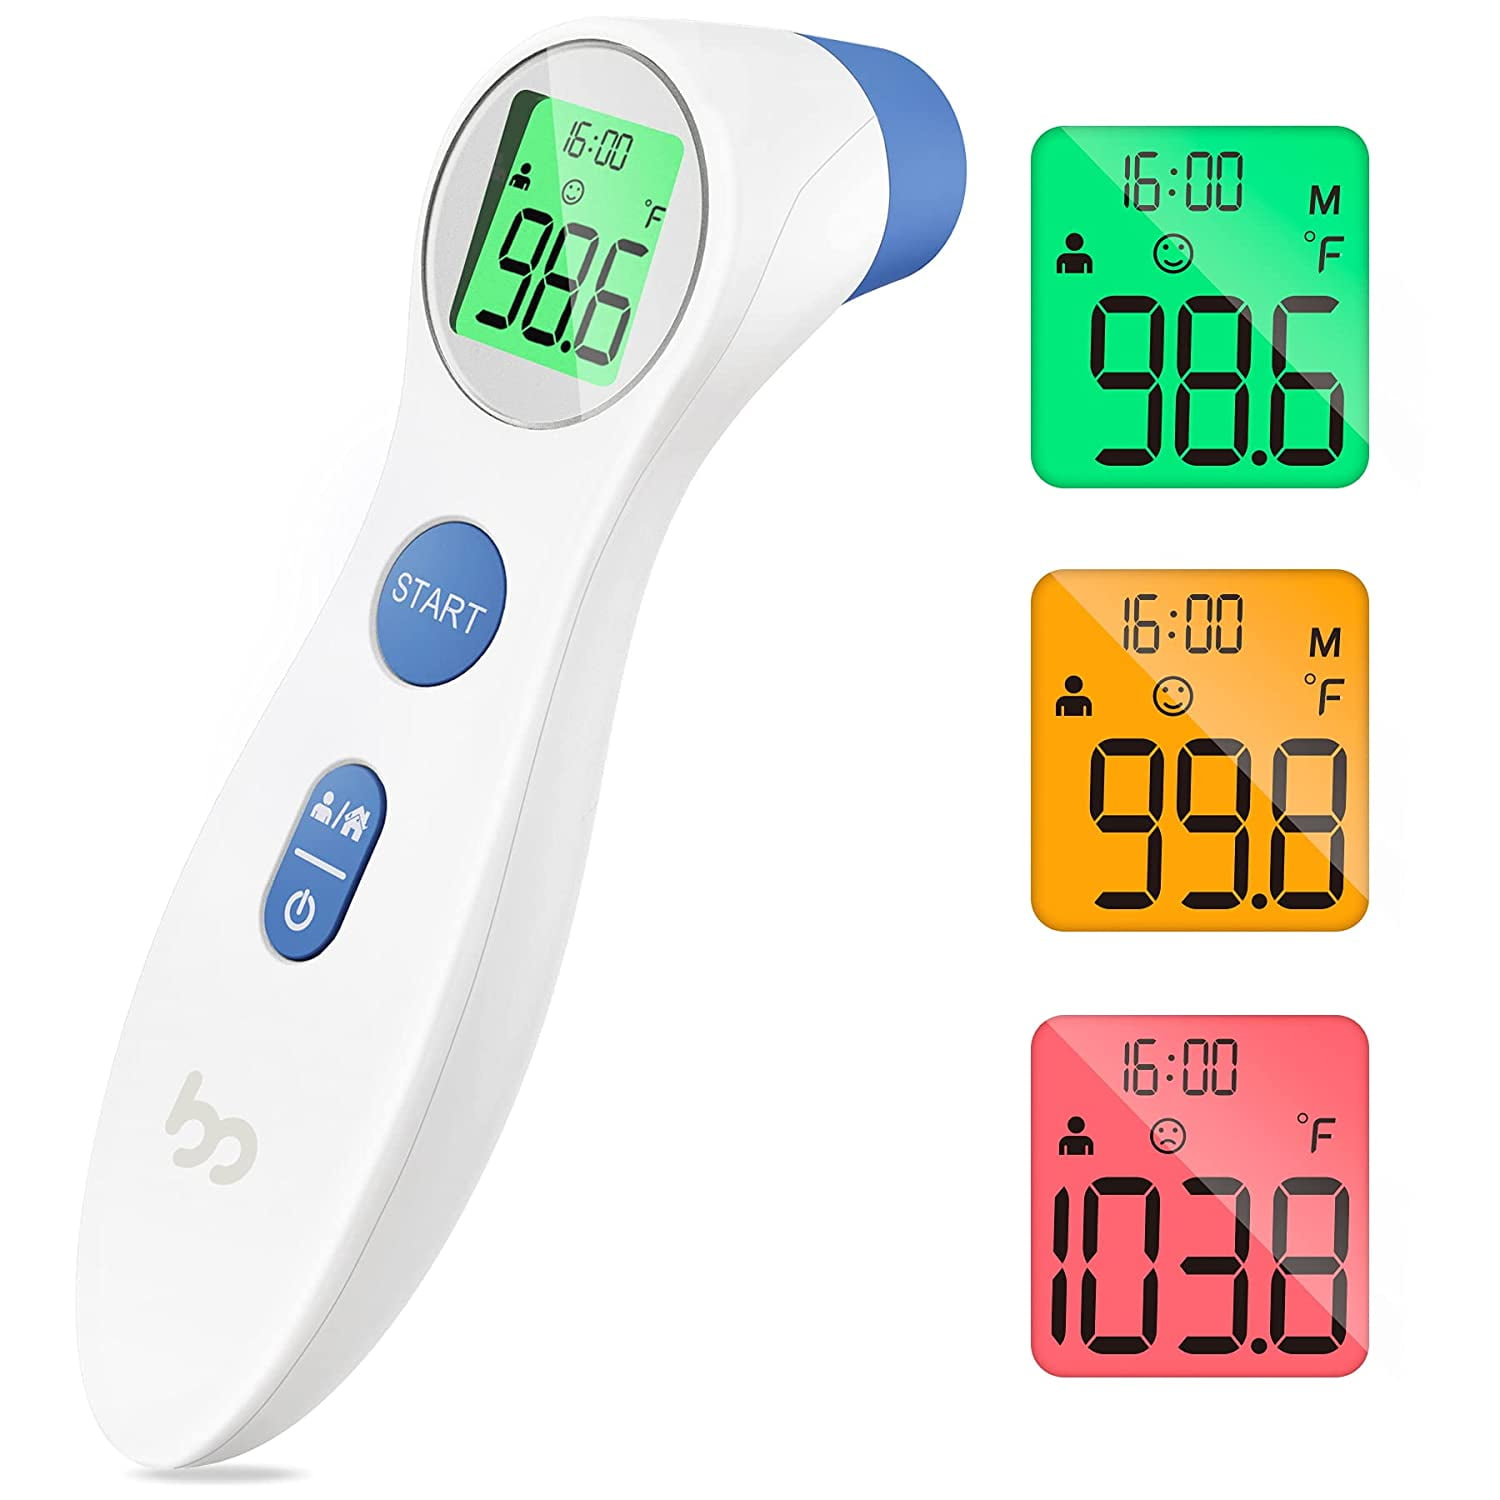 and Babies Digital Infrared Non-Contact Thermometer with Fever Indicator Kids Touchless Forehead Thermometer for Adults 1s Instant Accurate Reading by The Thermometer 